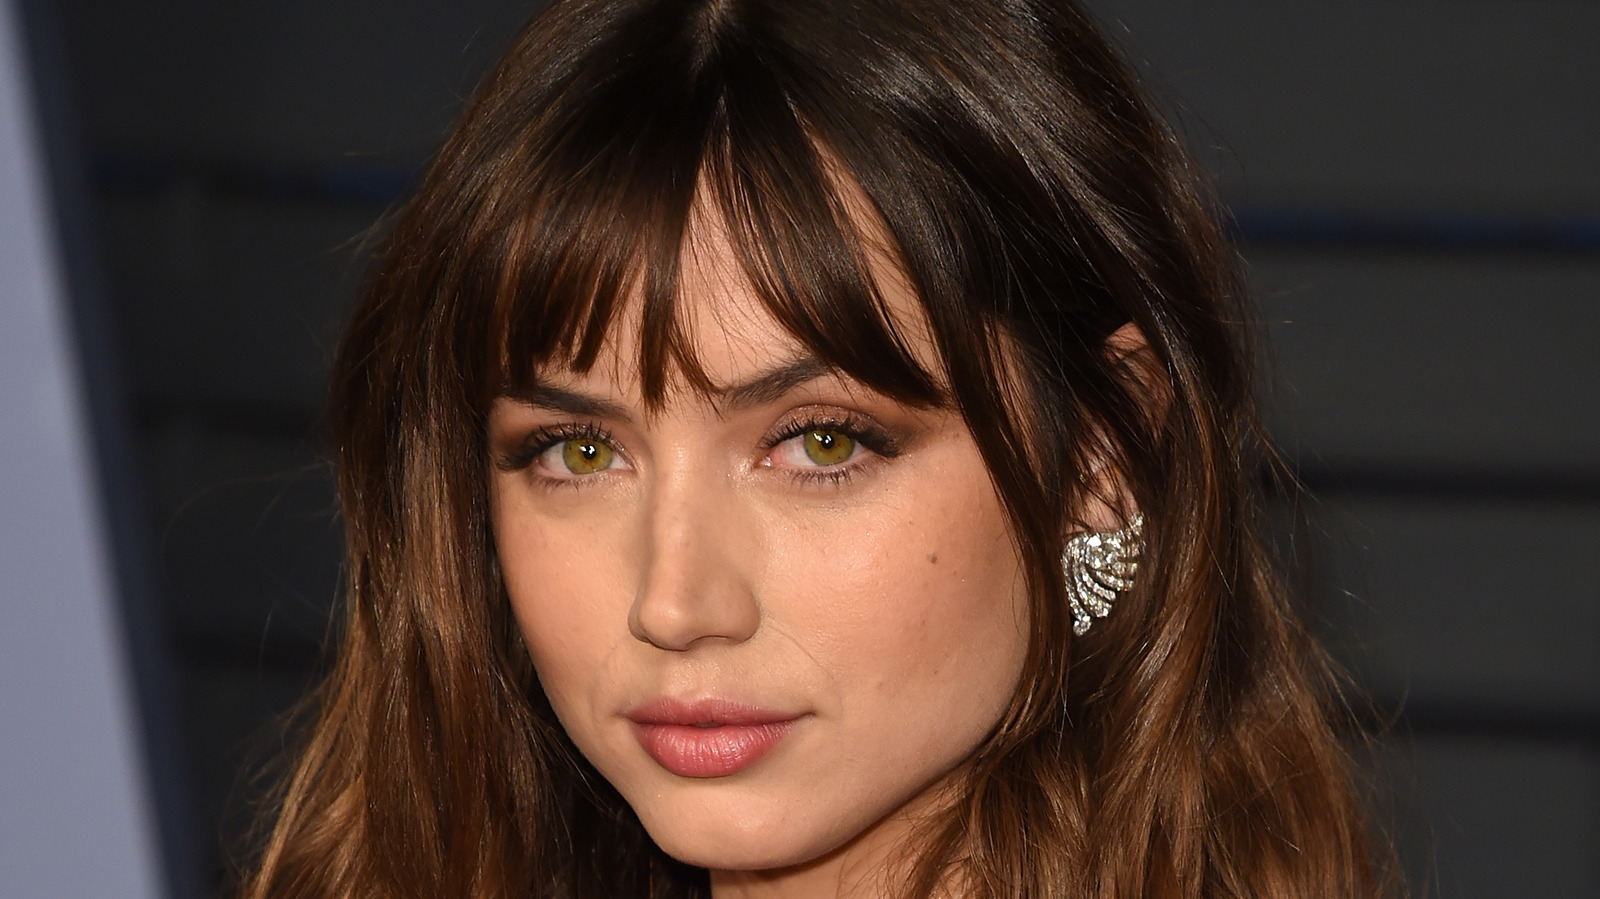 Why Knives Out Was Such A Special Role For Ana De Armas To Land